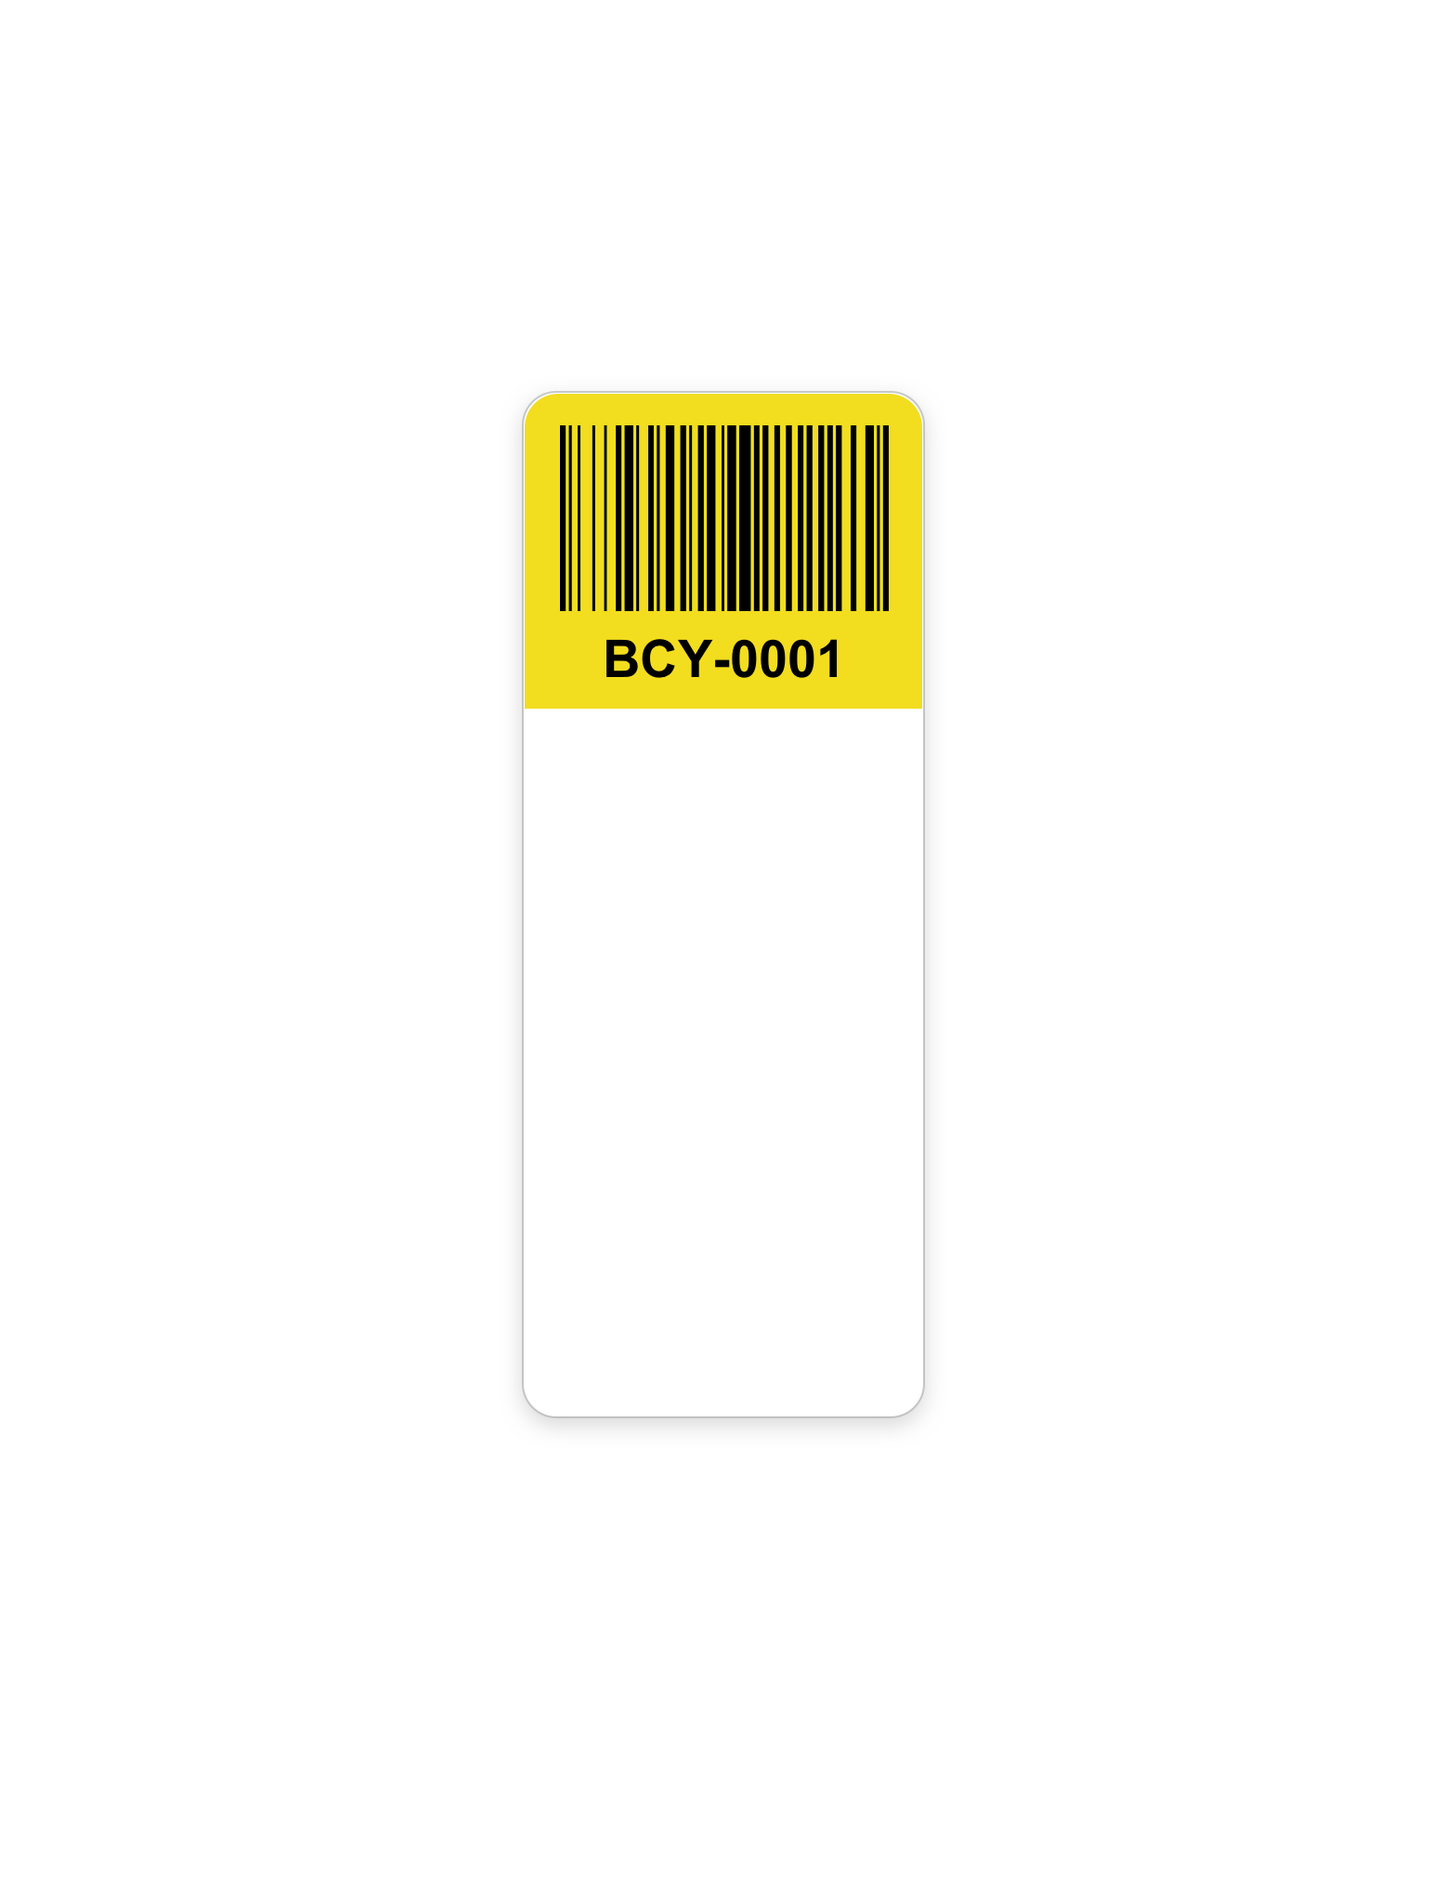 120 Cable Labels for bulk items